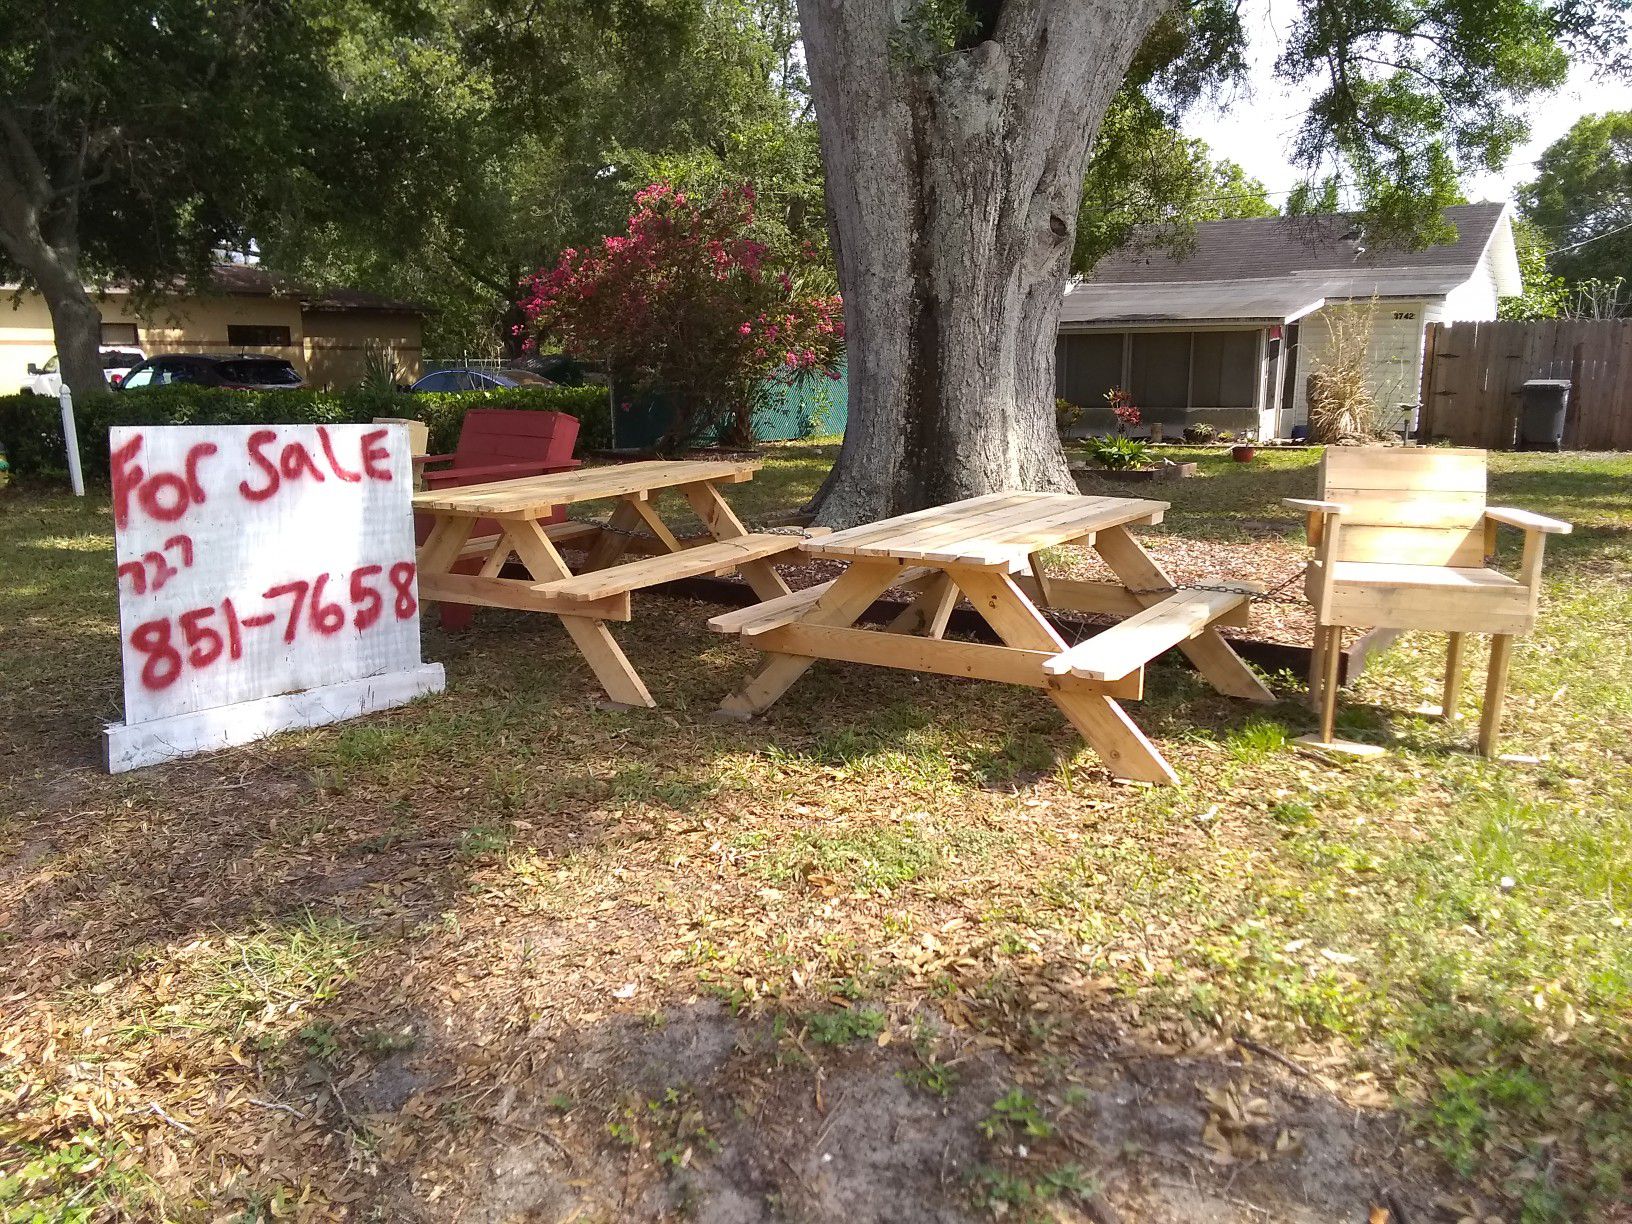 Picnic tables, porch swings, chairs